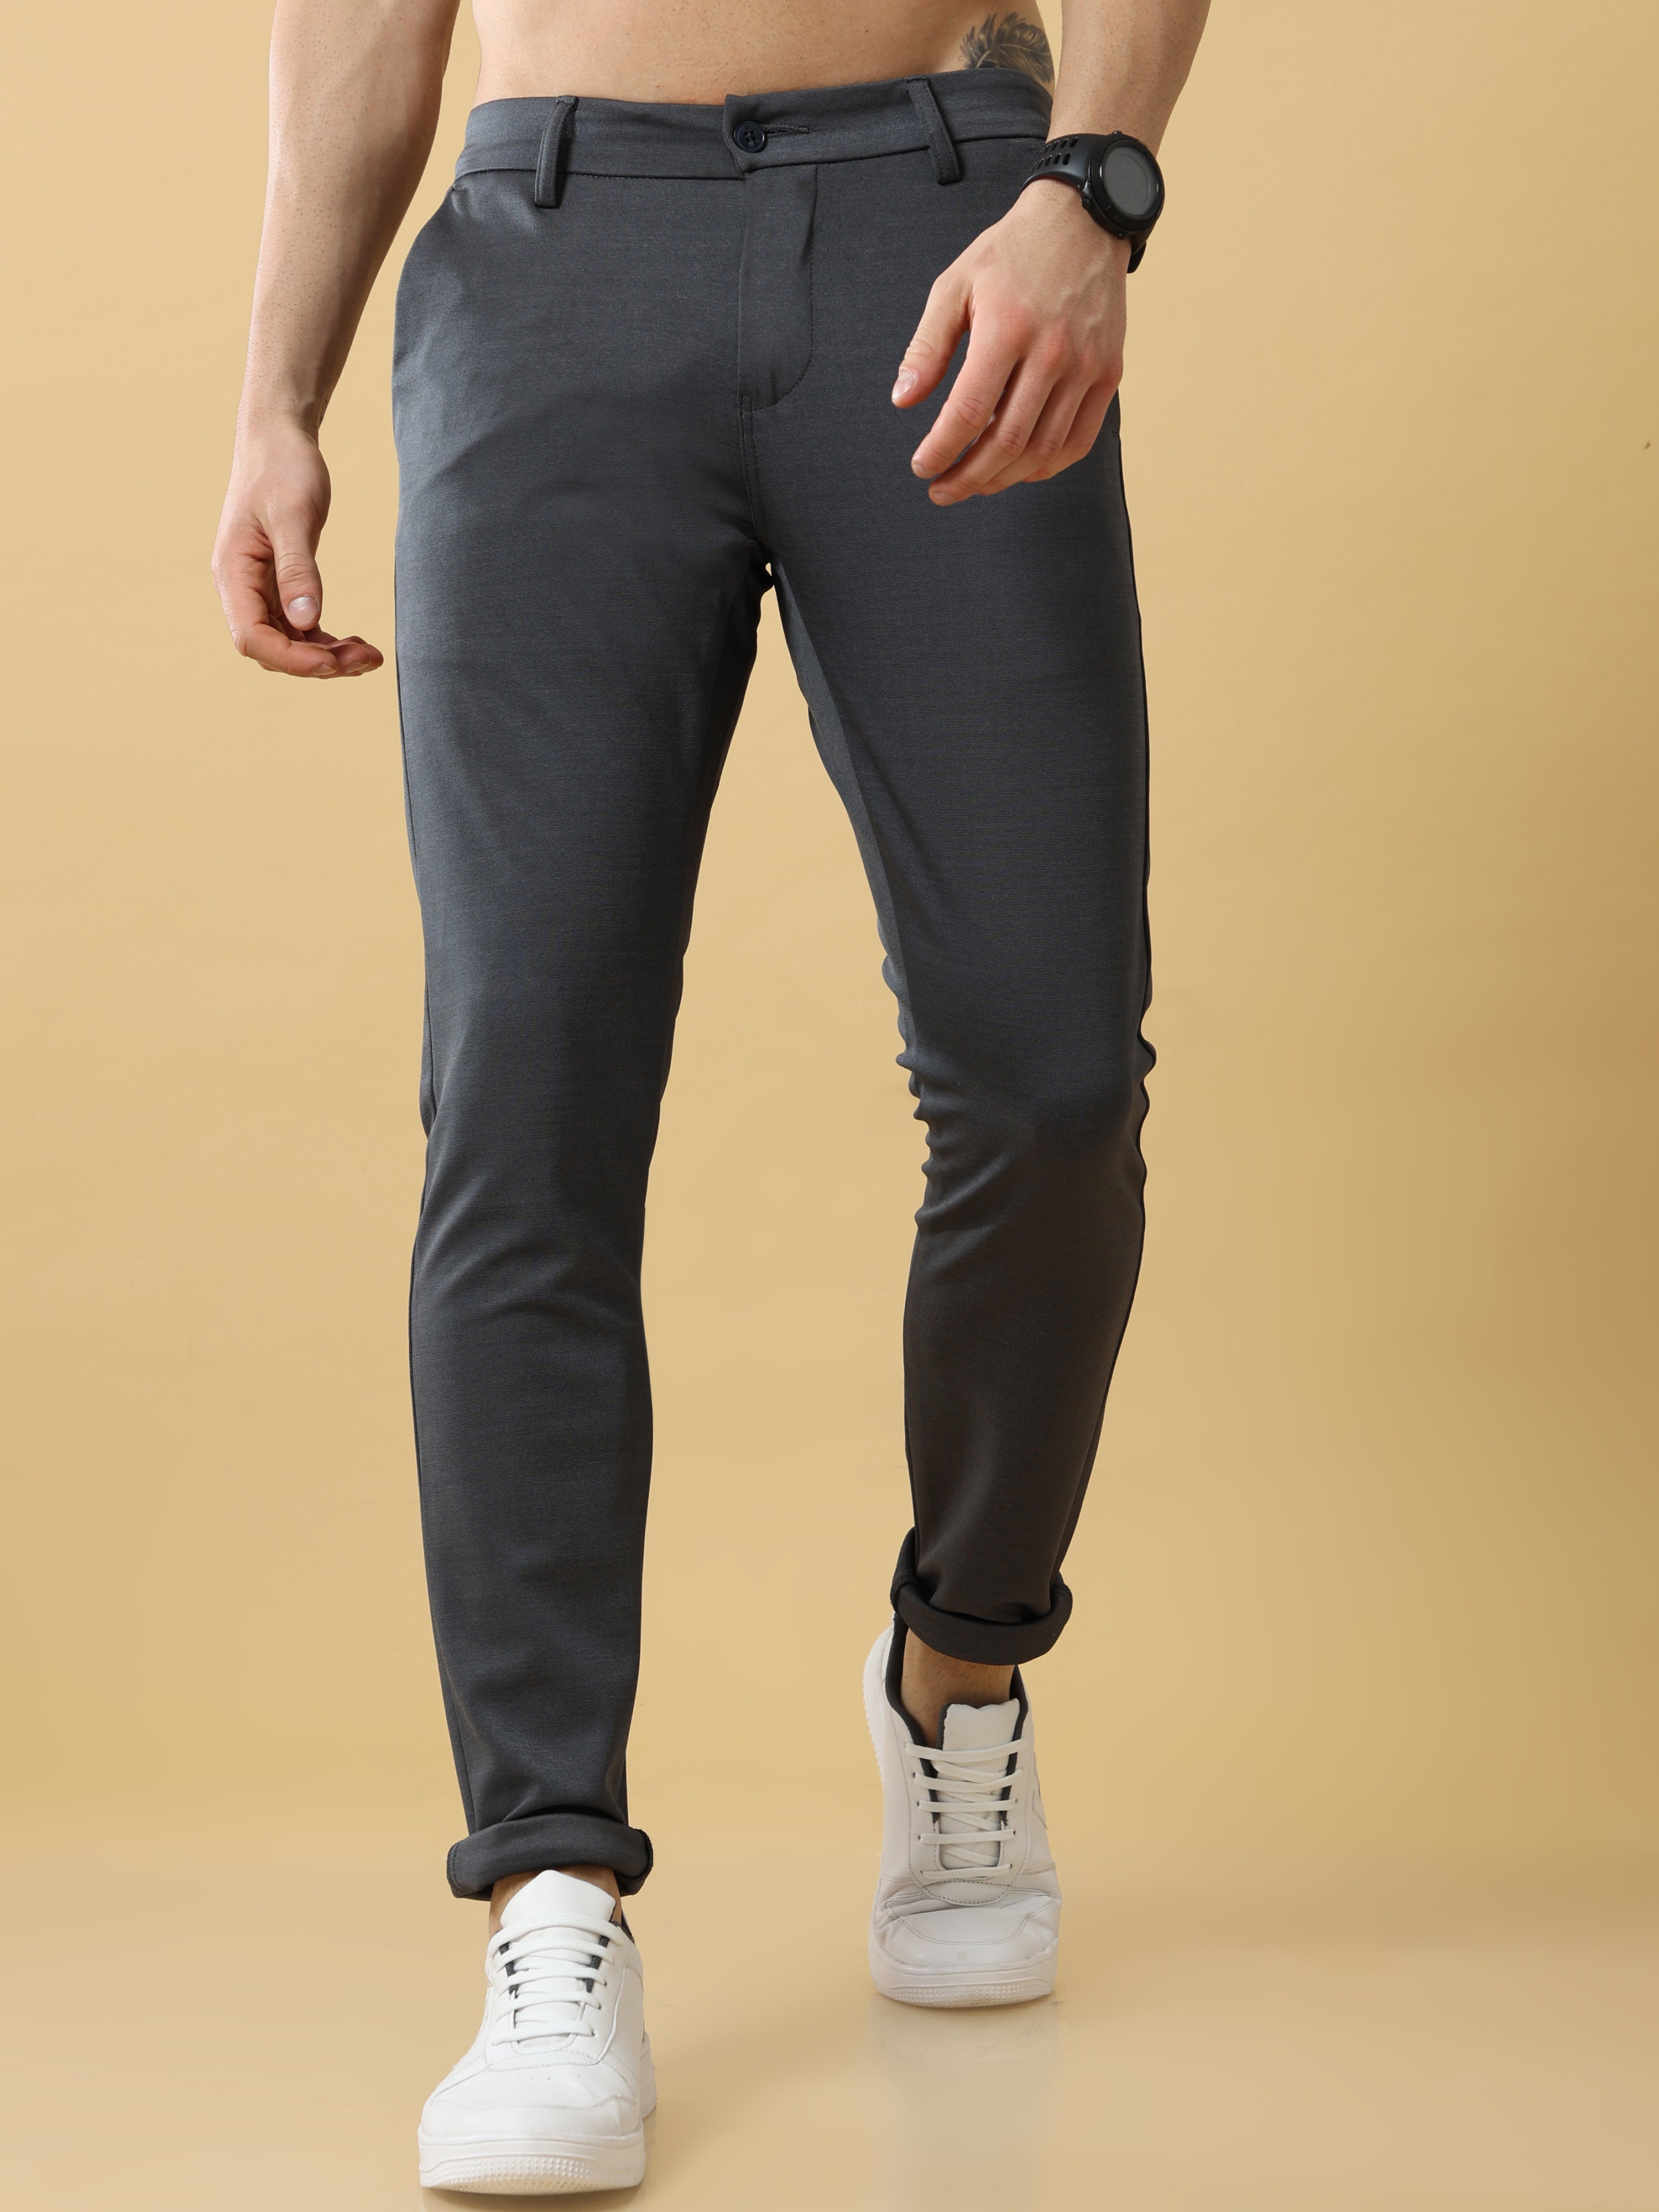 Men's Black Chino Pants For Sale – GINGTTO